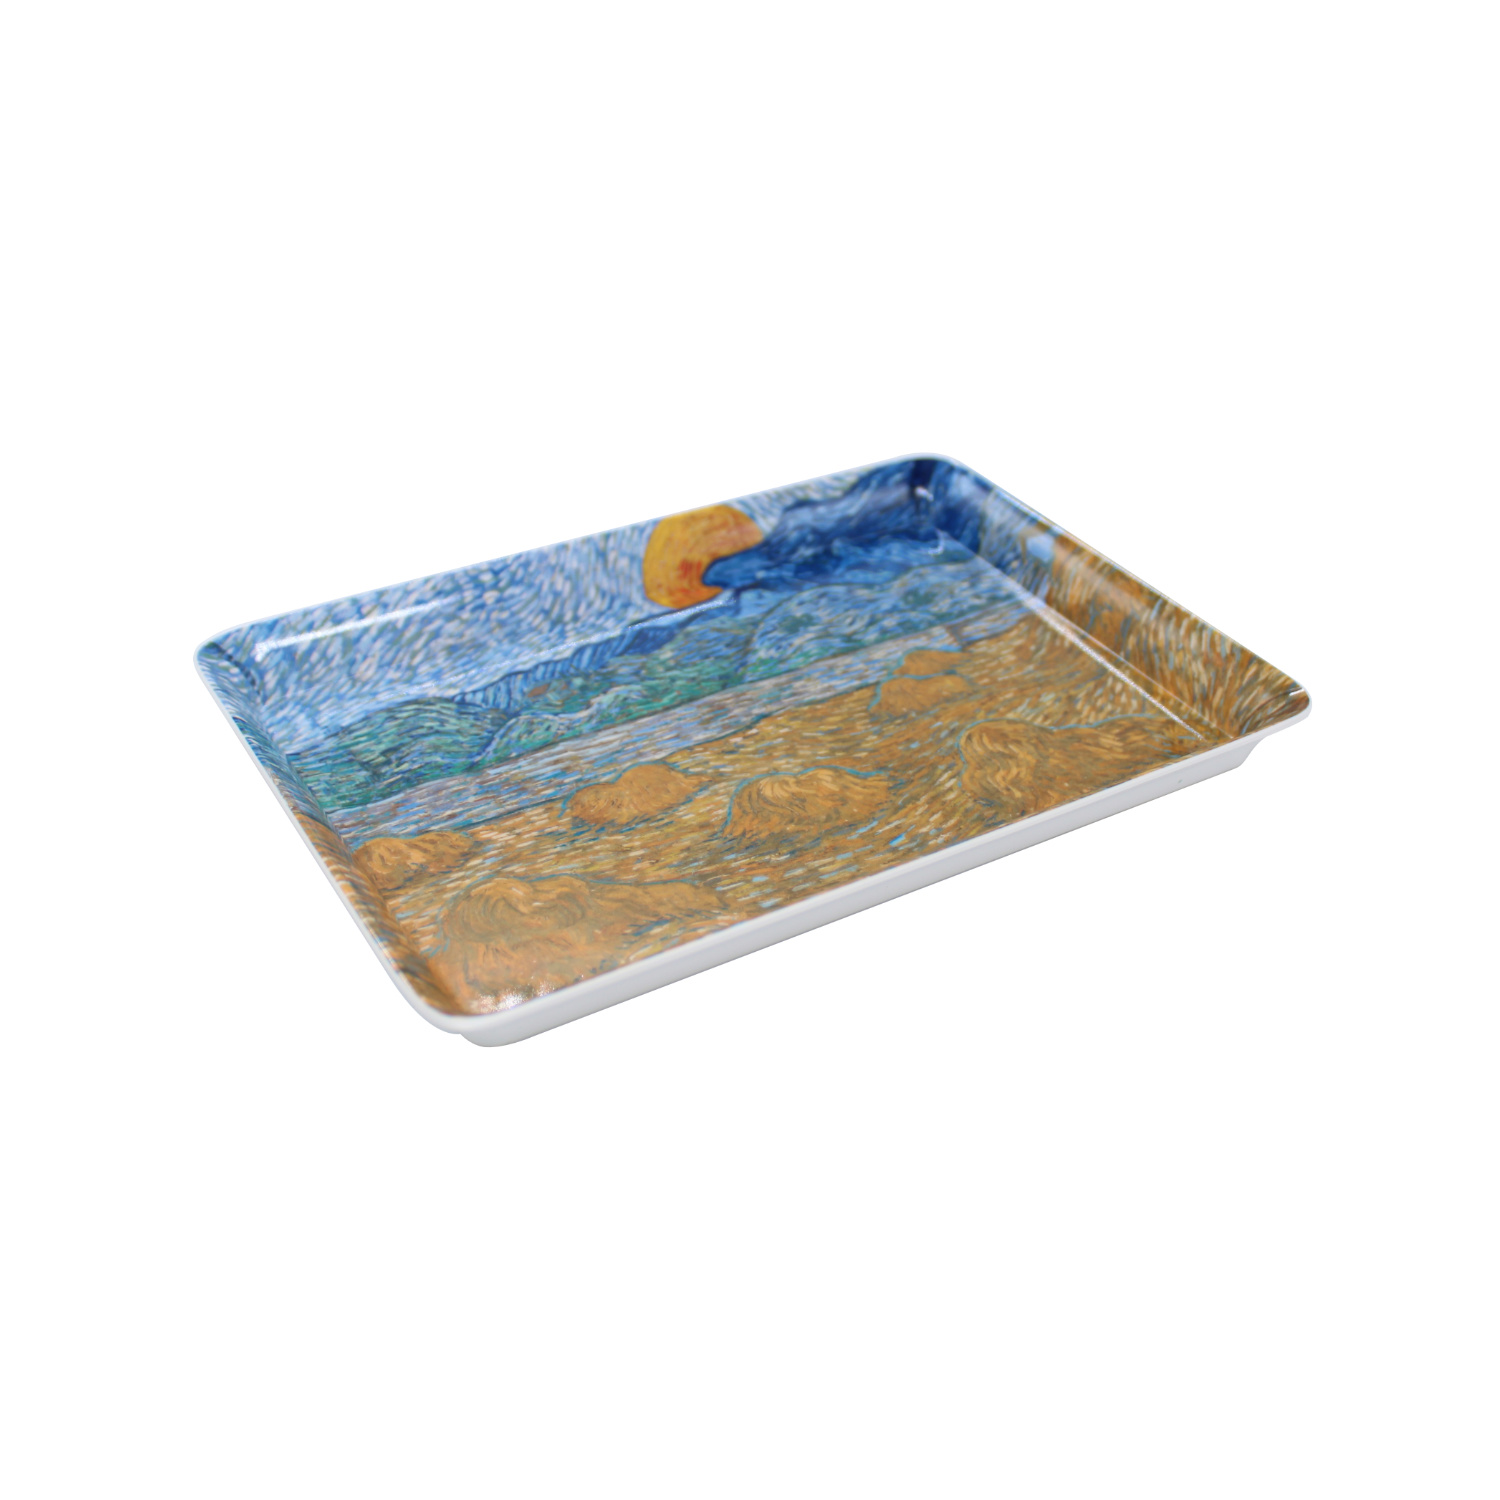 Mini serving tray Van Gogh Landscape with wheat sheaves and rising moon